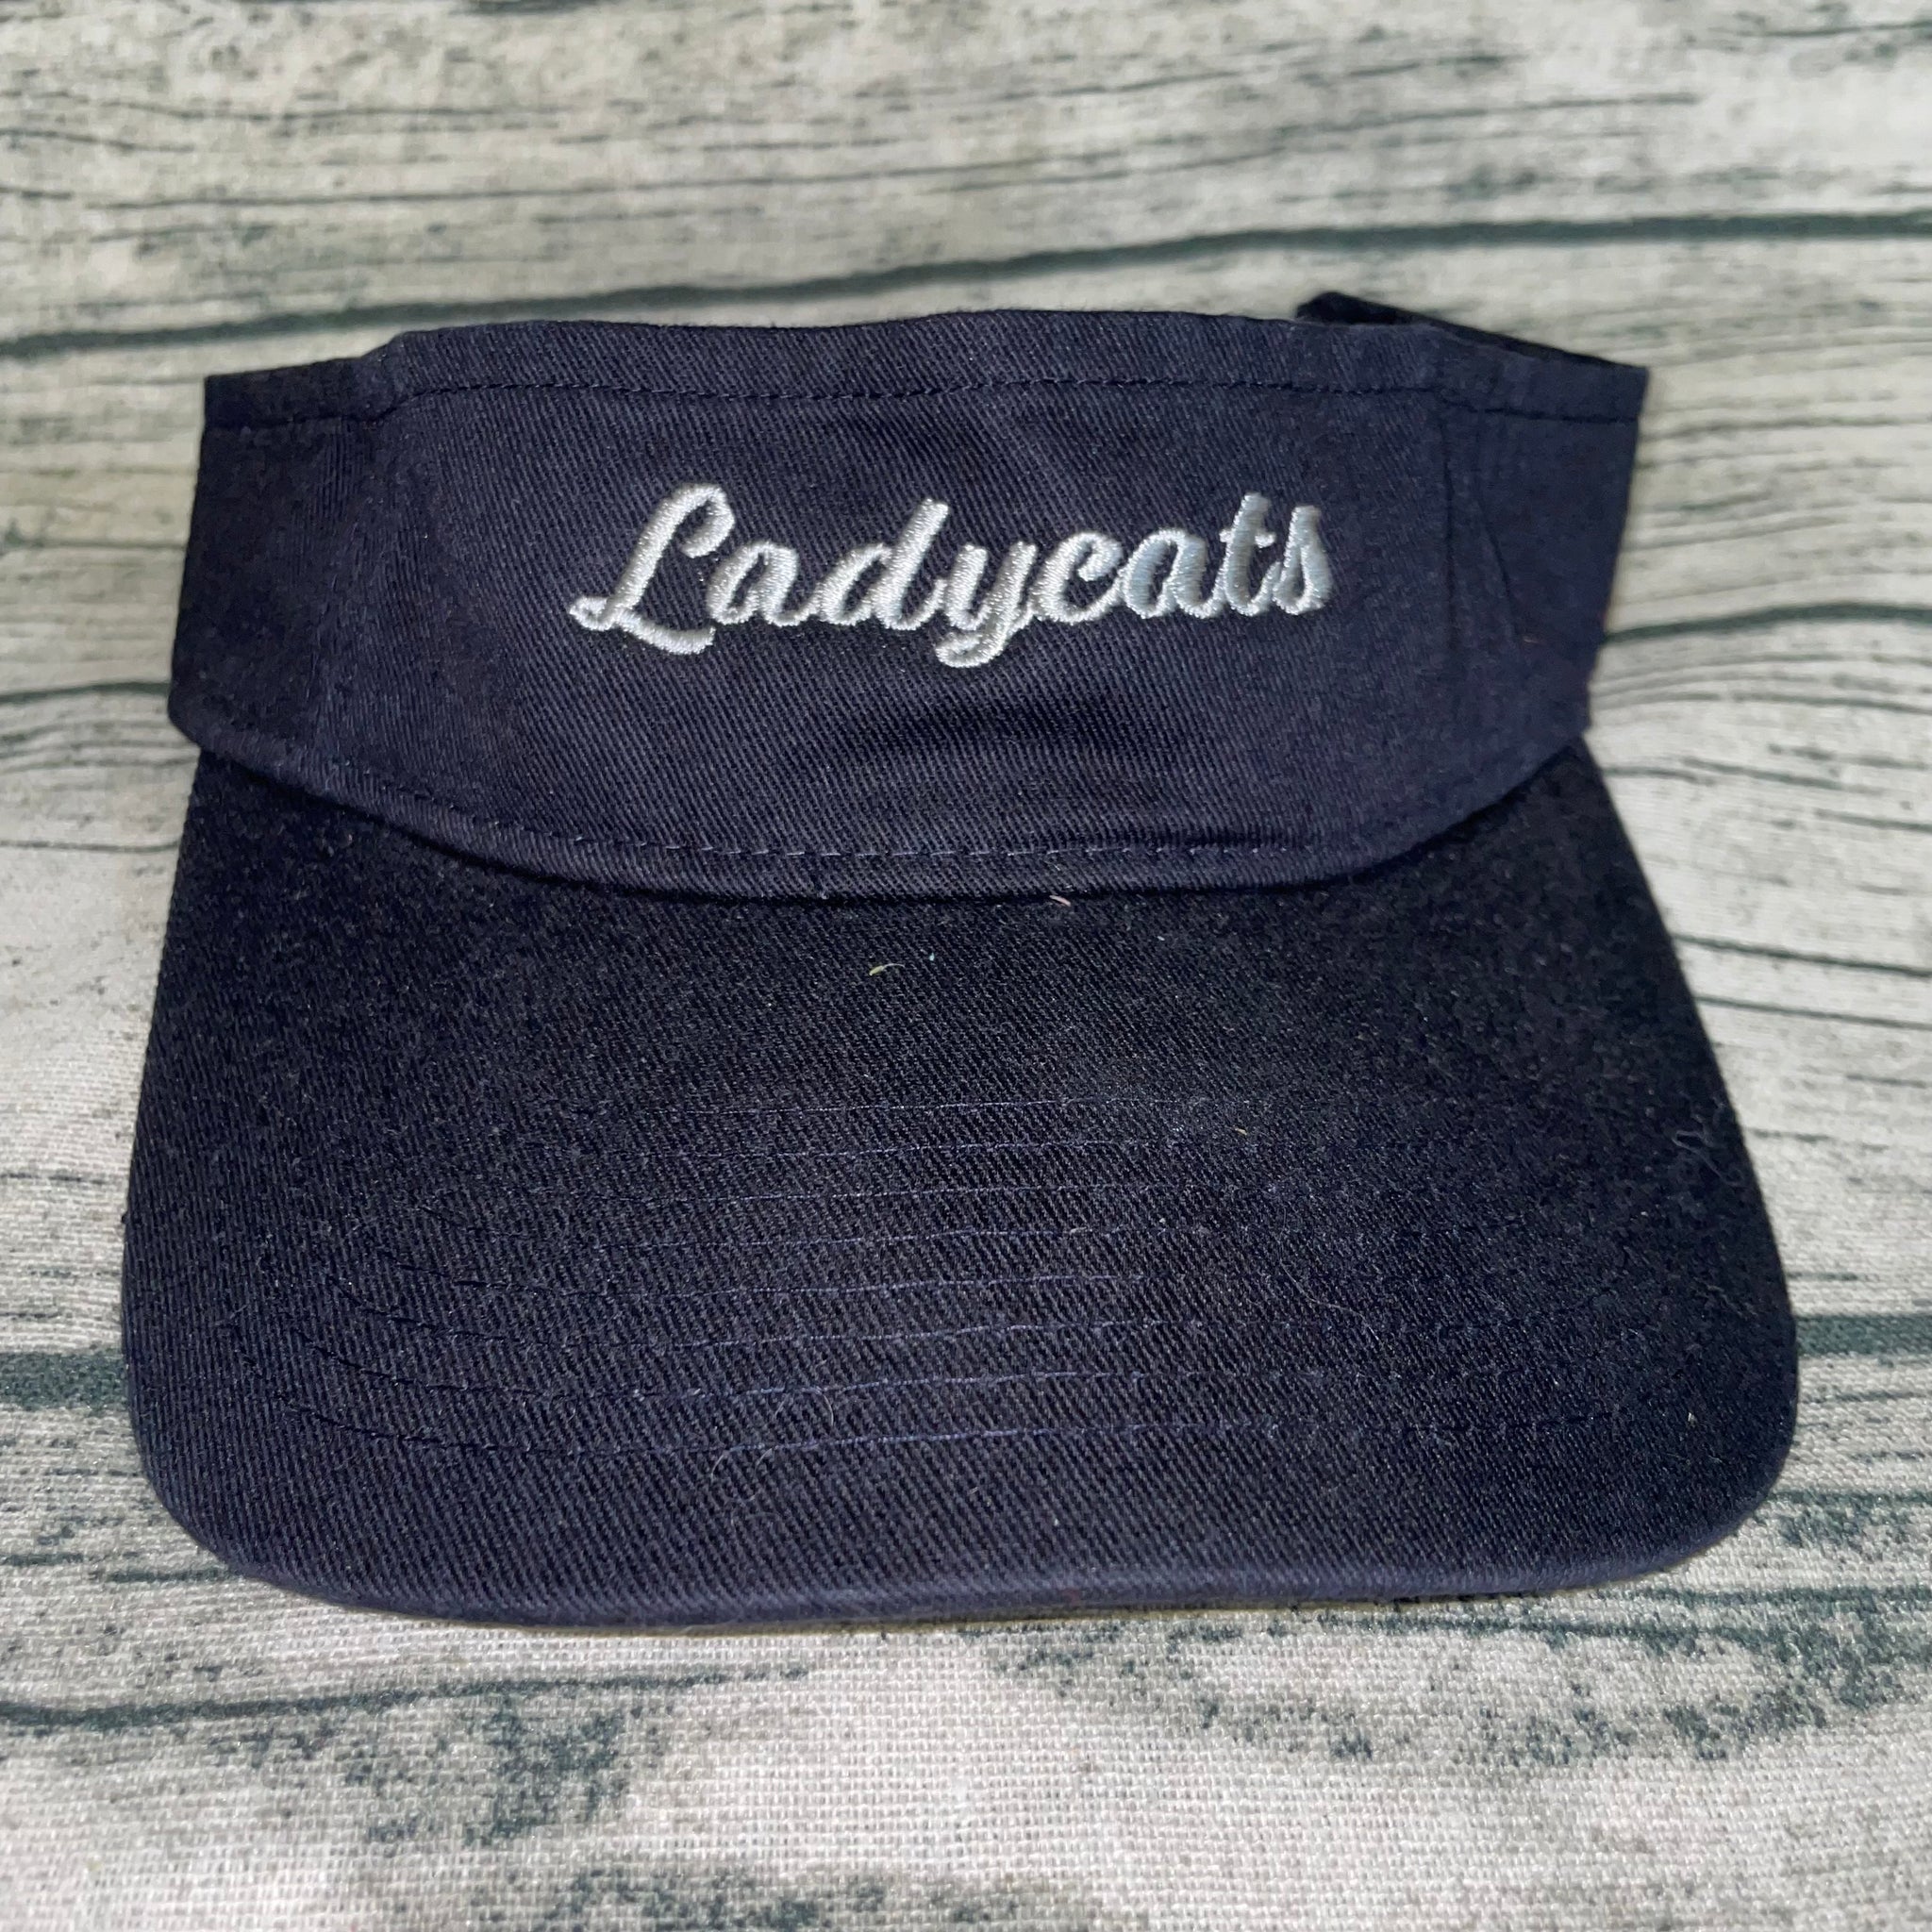 Ladycats Visor Embroidered